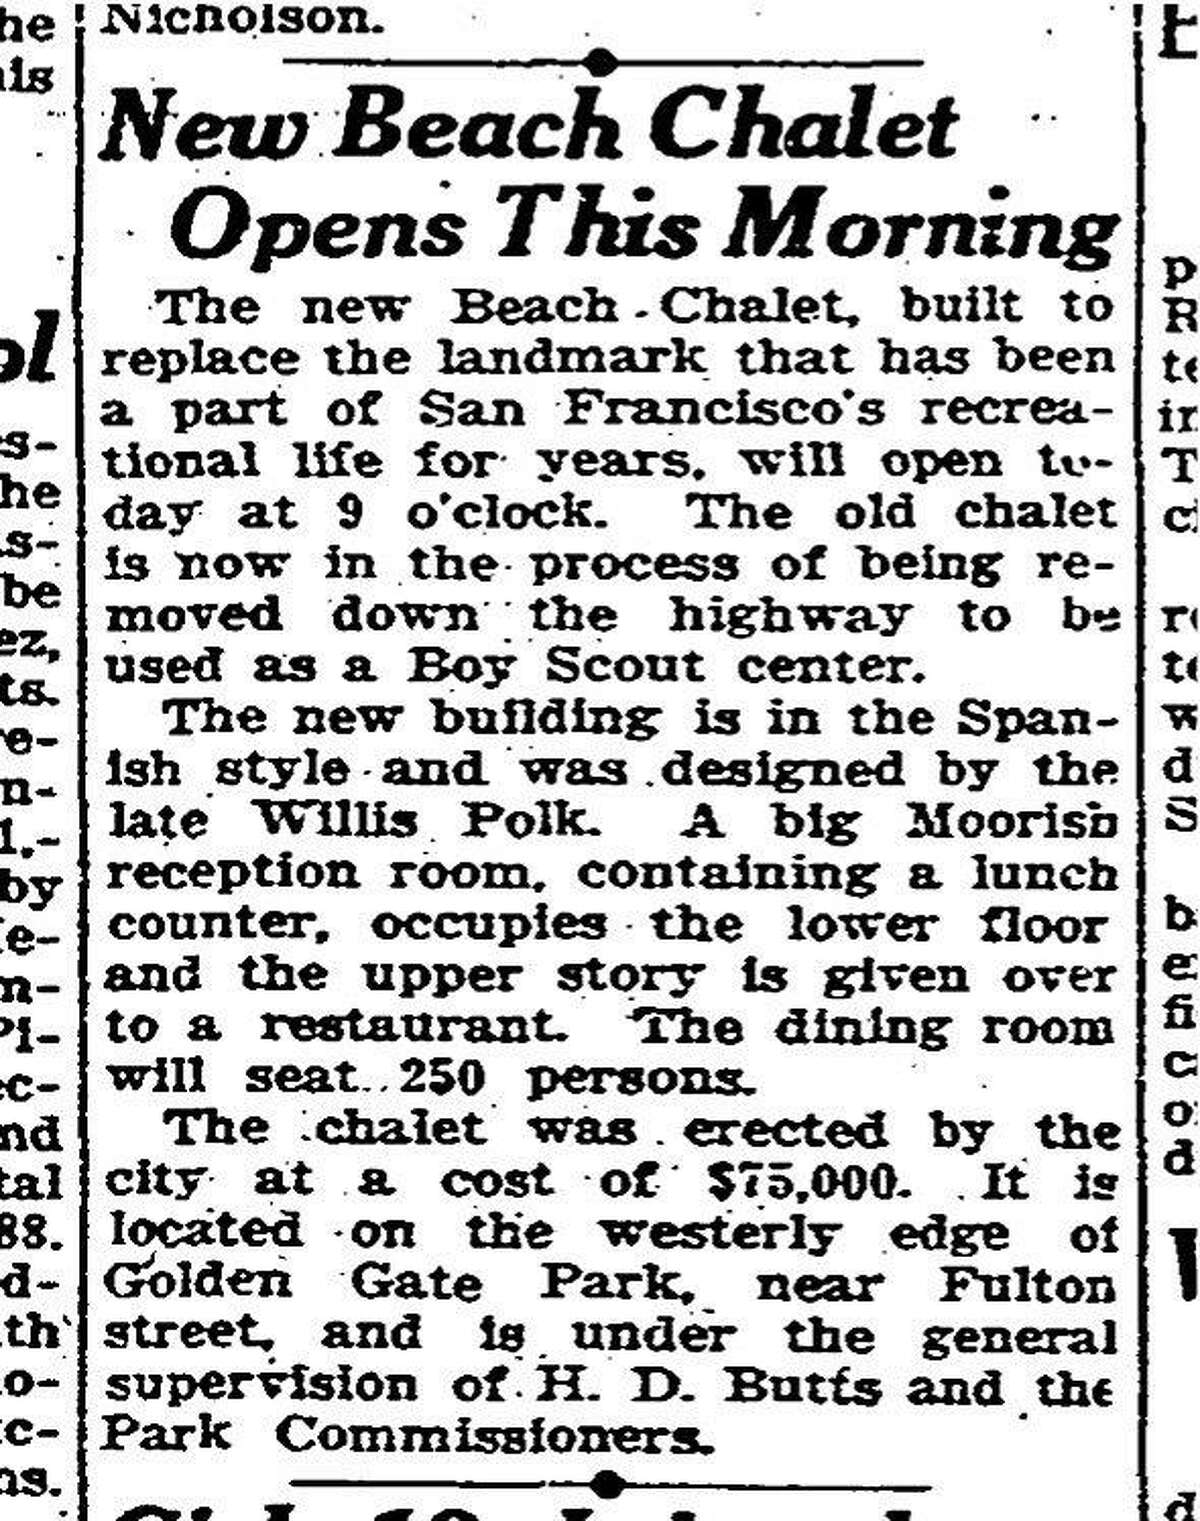 The May 30, 1925 Chronicle reports on the opening of the Beach Chalet, a Spanish-style building designed by Willis Polk.